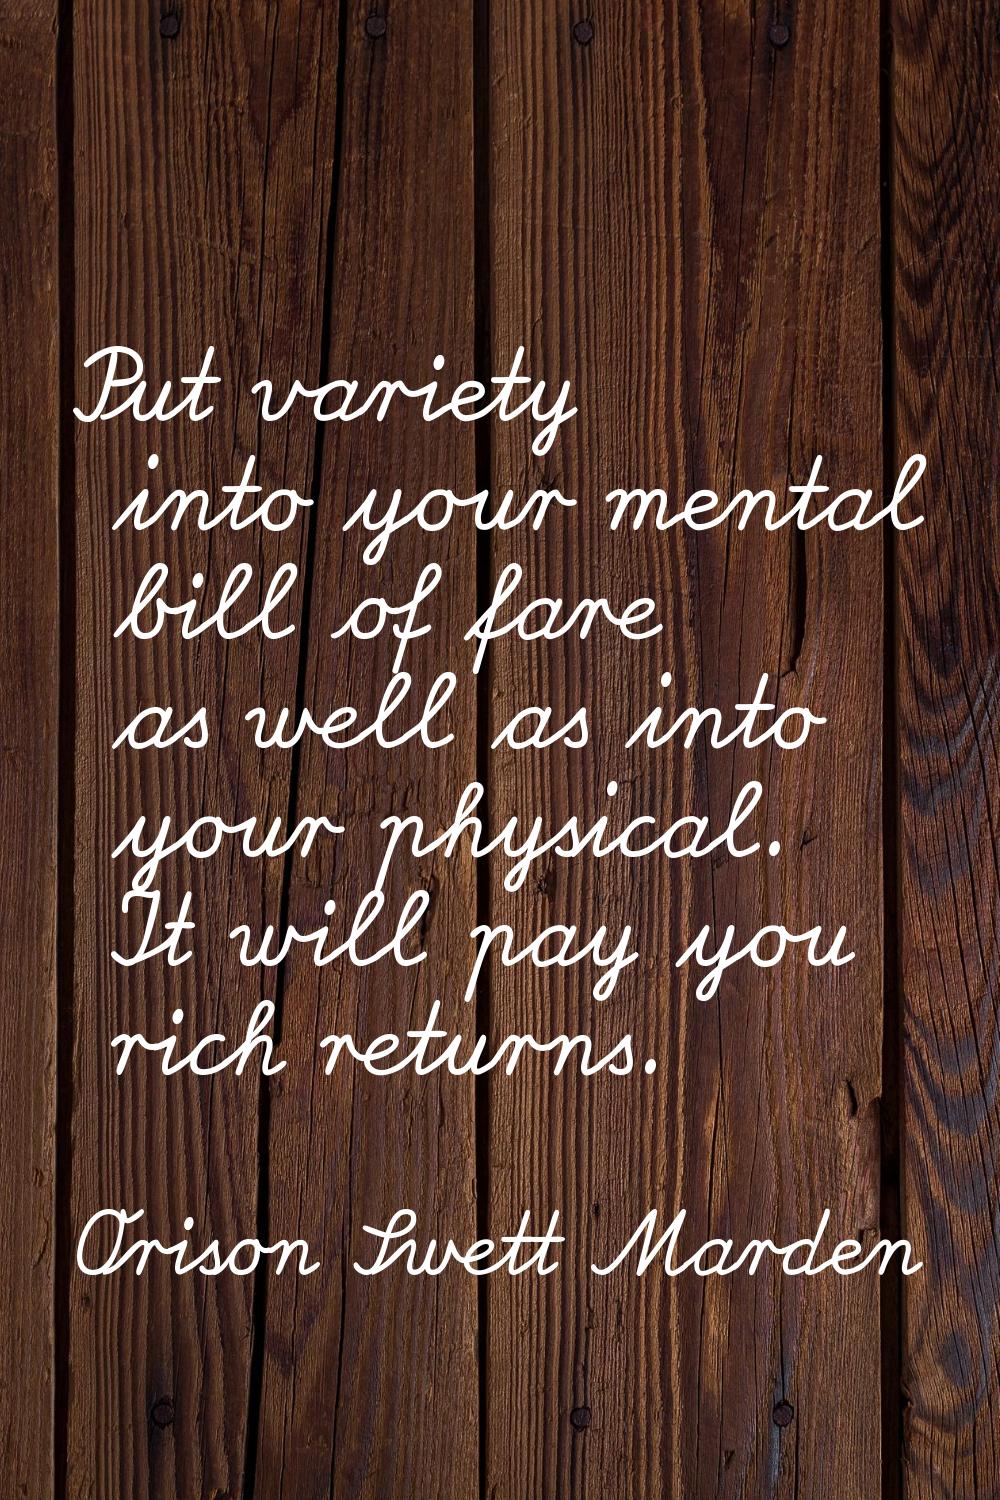 Put variety into your mental bill of fare as well as into your physical. It will pay you rich retur